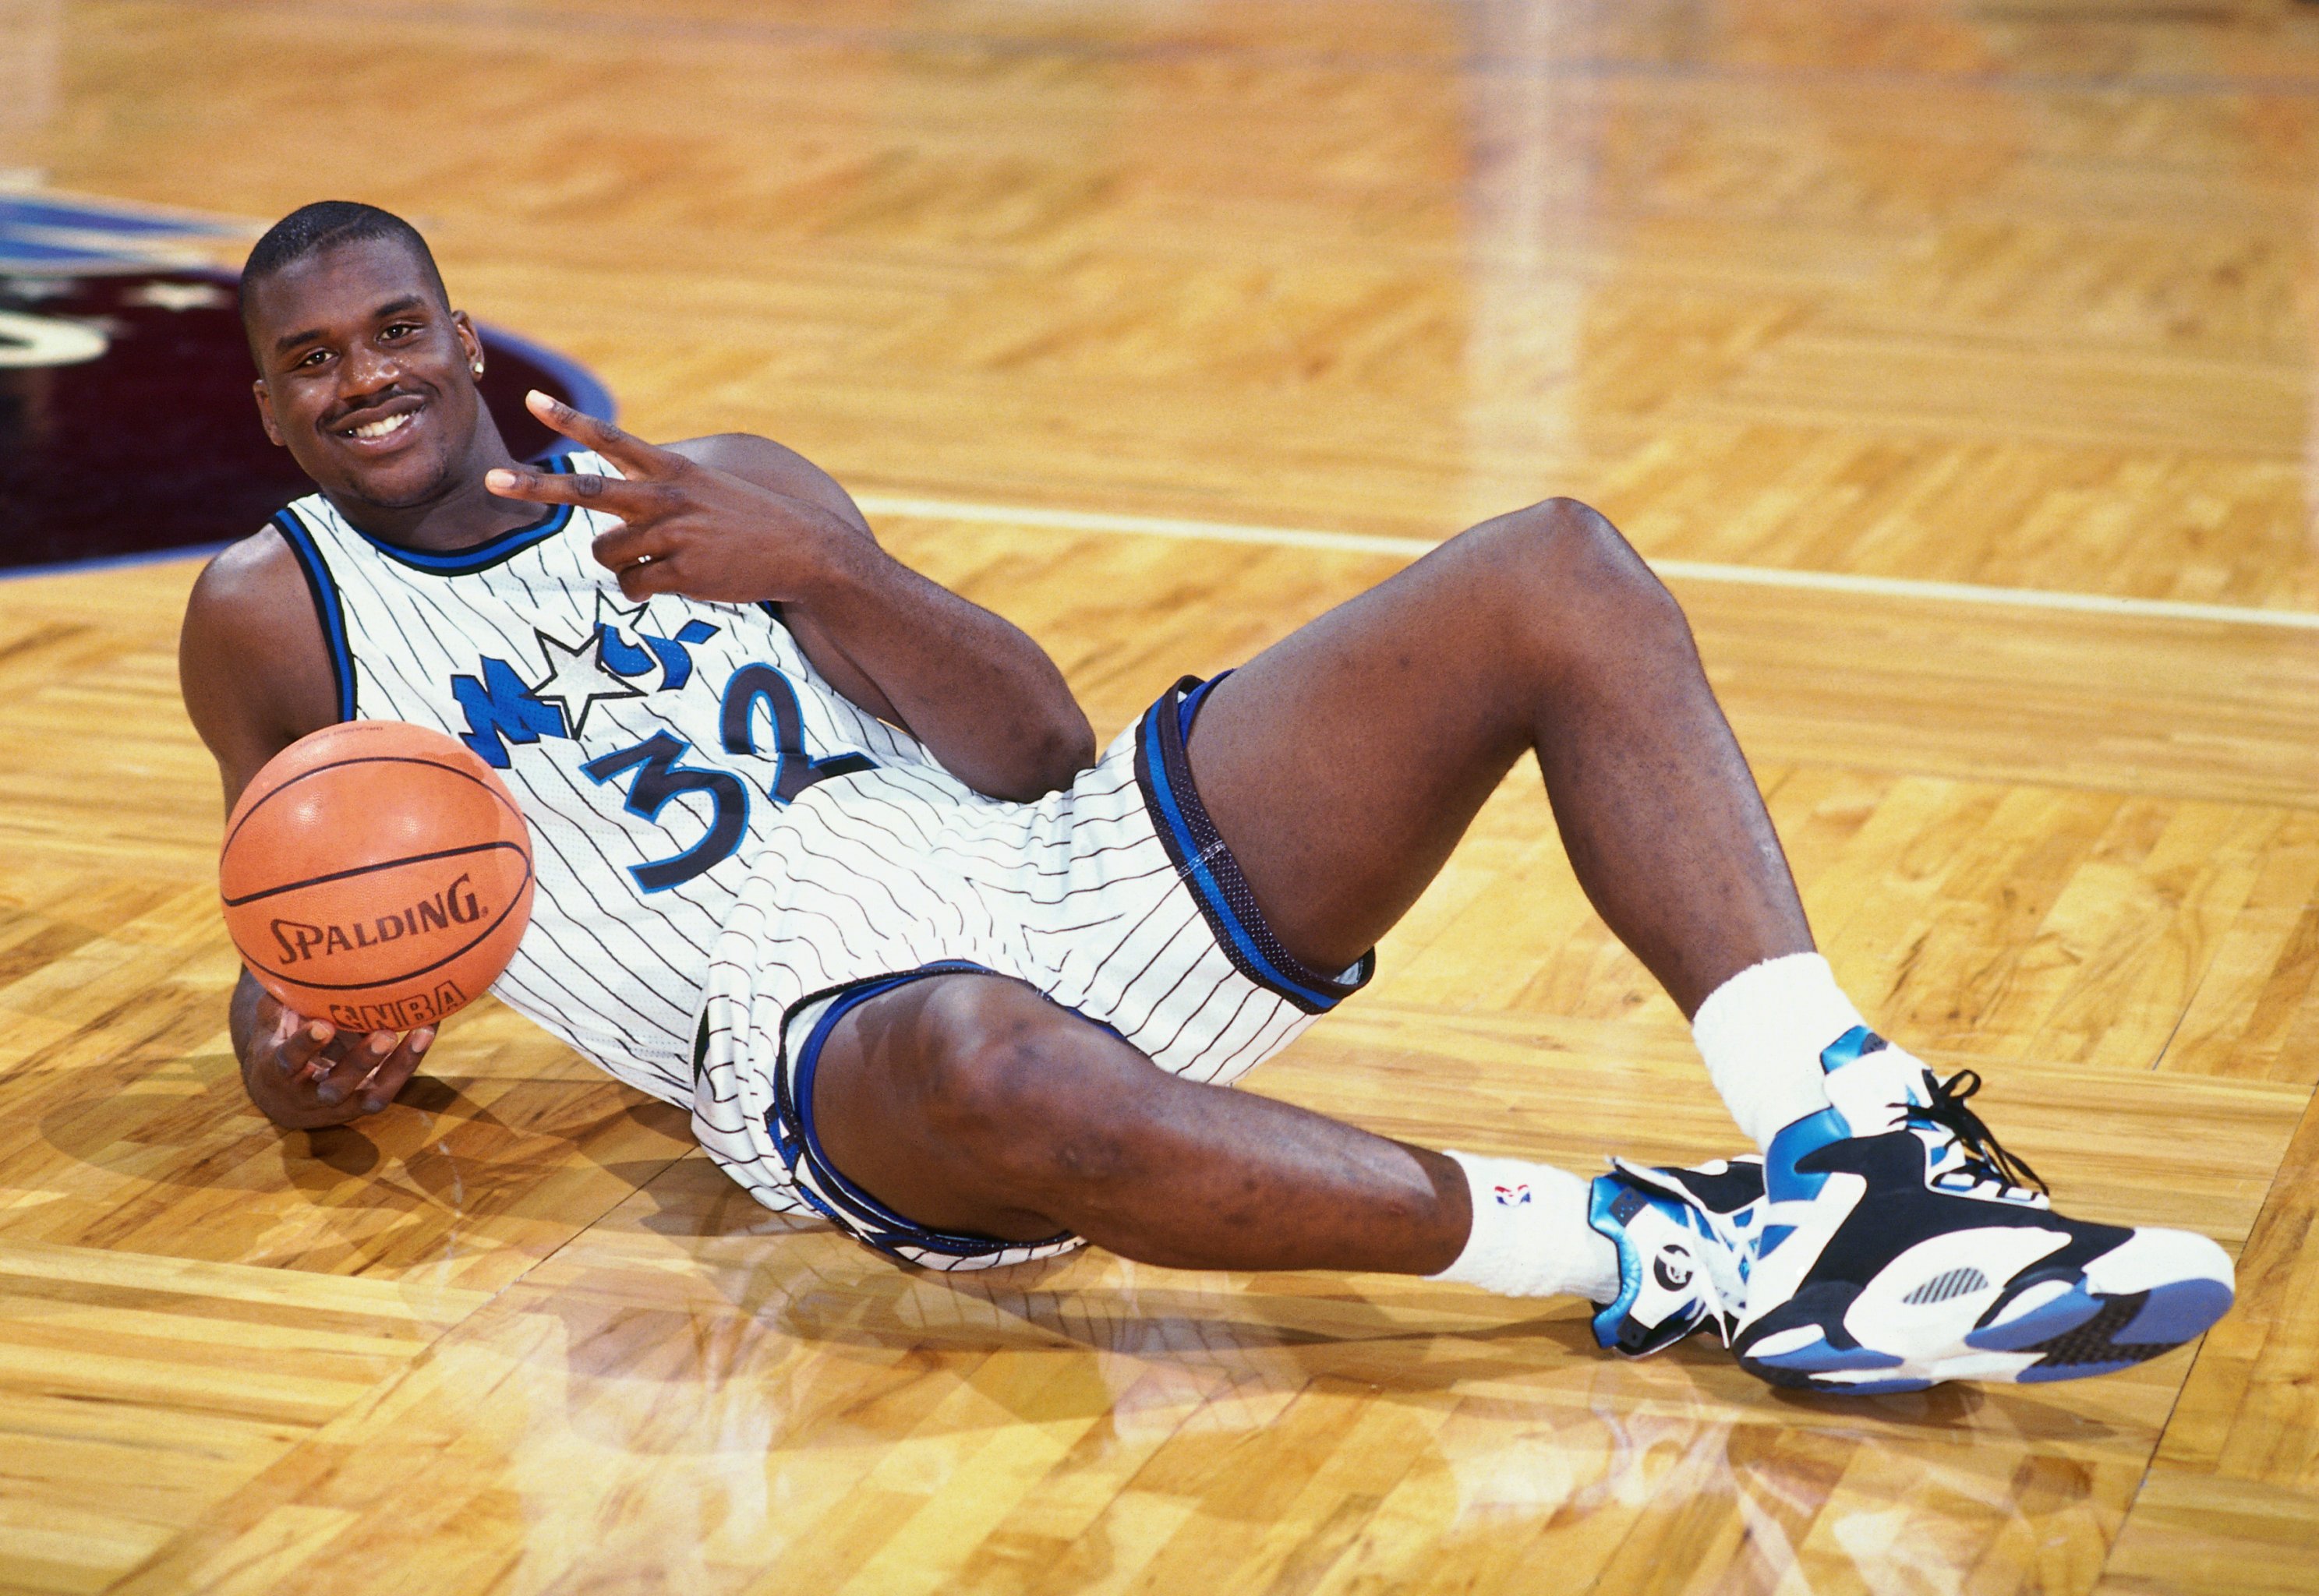 Shaquille O'Neal in the Hall of Fame: 5 reasons there will never